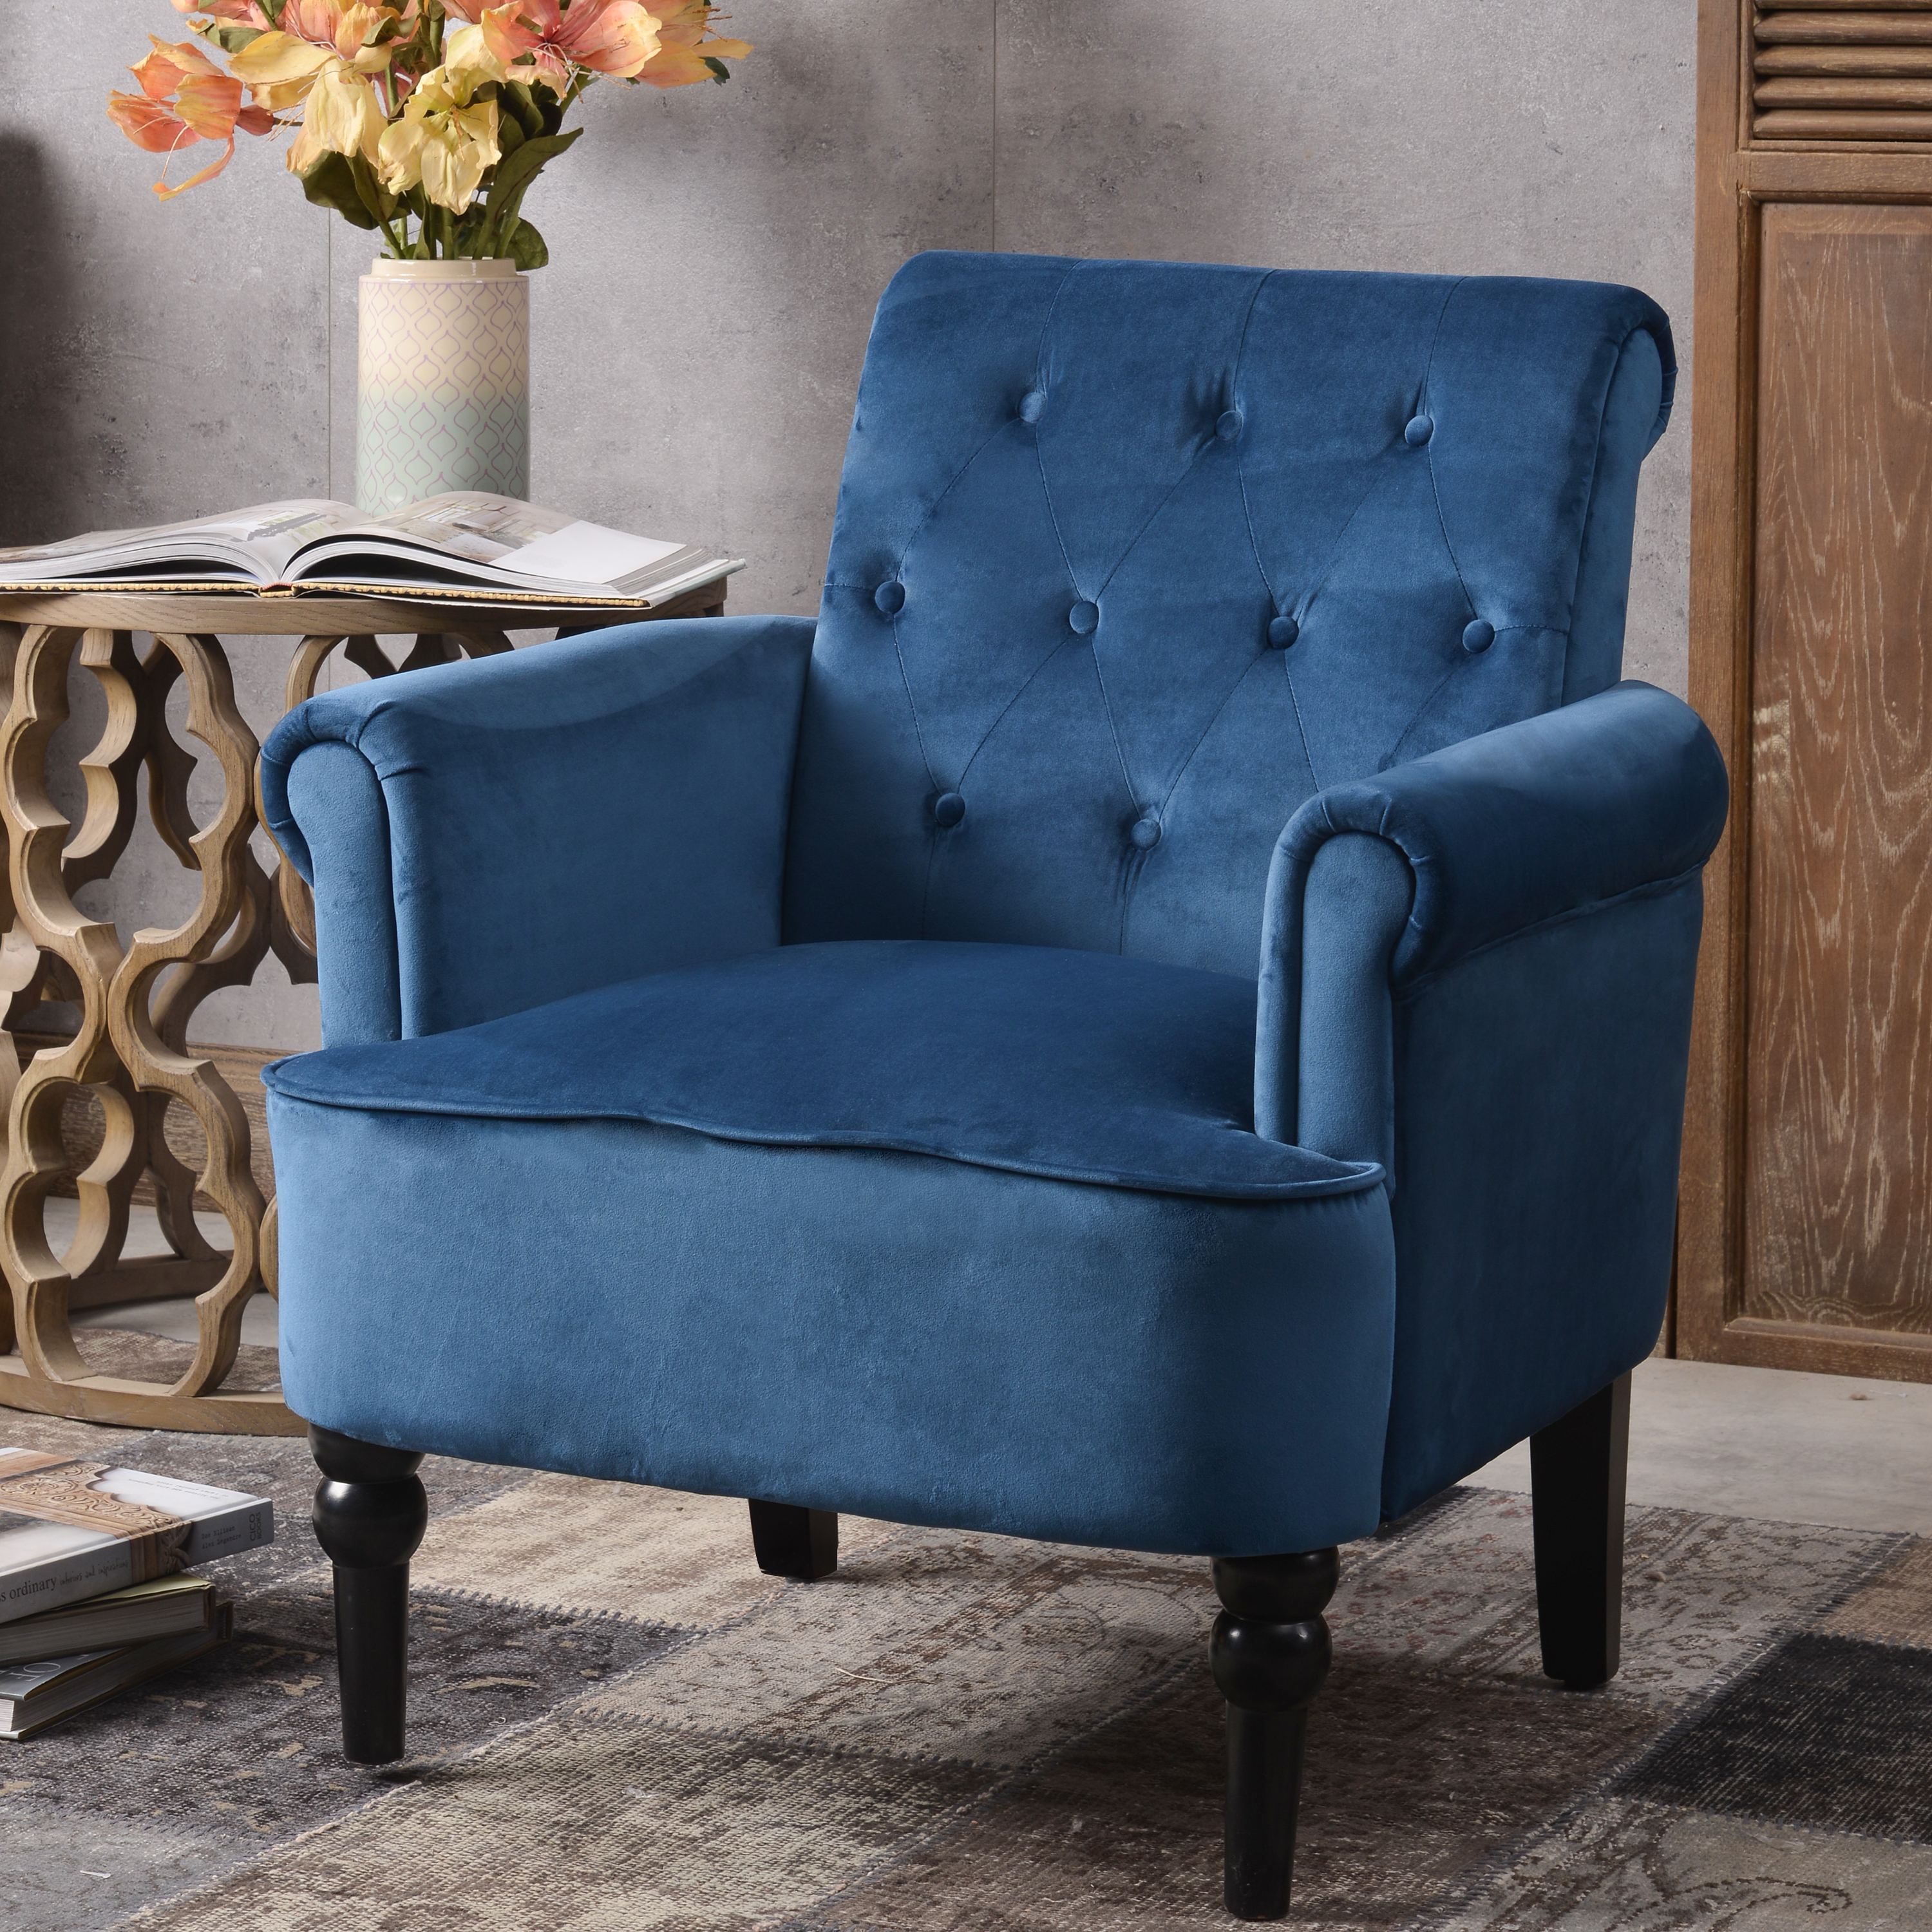 Elegant Button Tufted Club Chair Accent Armchairs Roll Arm Living Room Cushion with Wooden Legs, Navy Blue-CASAINC